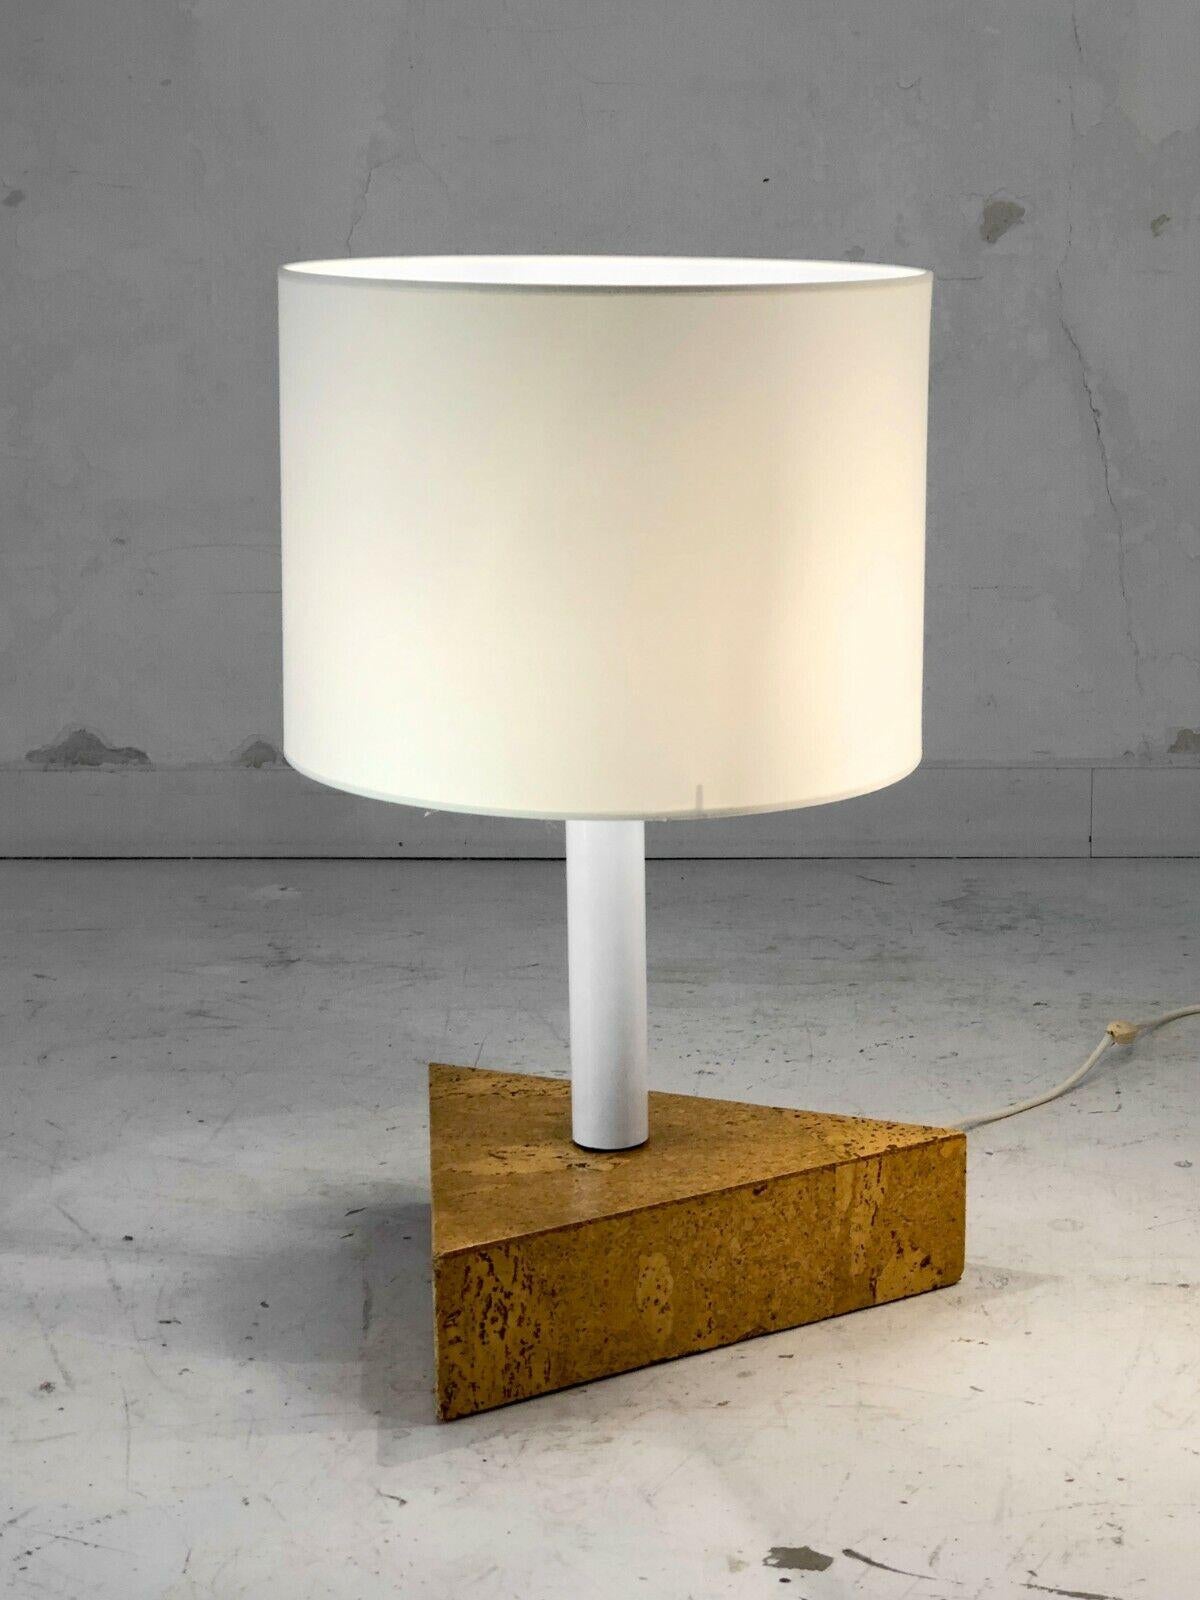 An enormous table lamp or rather, floor lamp, Post-Modernist, Bauhaus, Memphis, thick triangular base in wood veneered with varnished cork burr, white lacquered metal tube topped with a screw bulb and a large lampshade. cylindrical day, to be